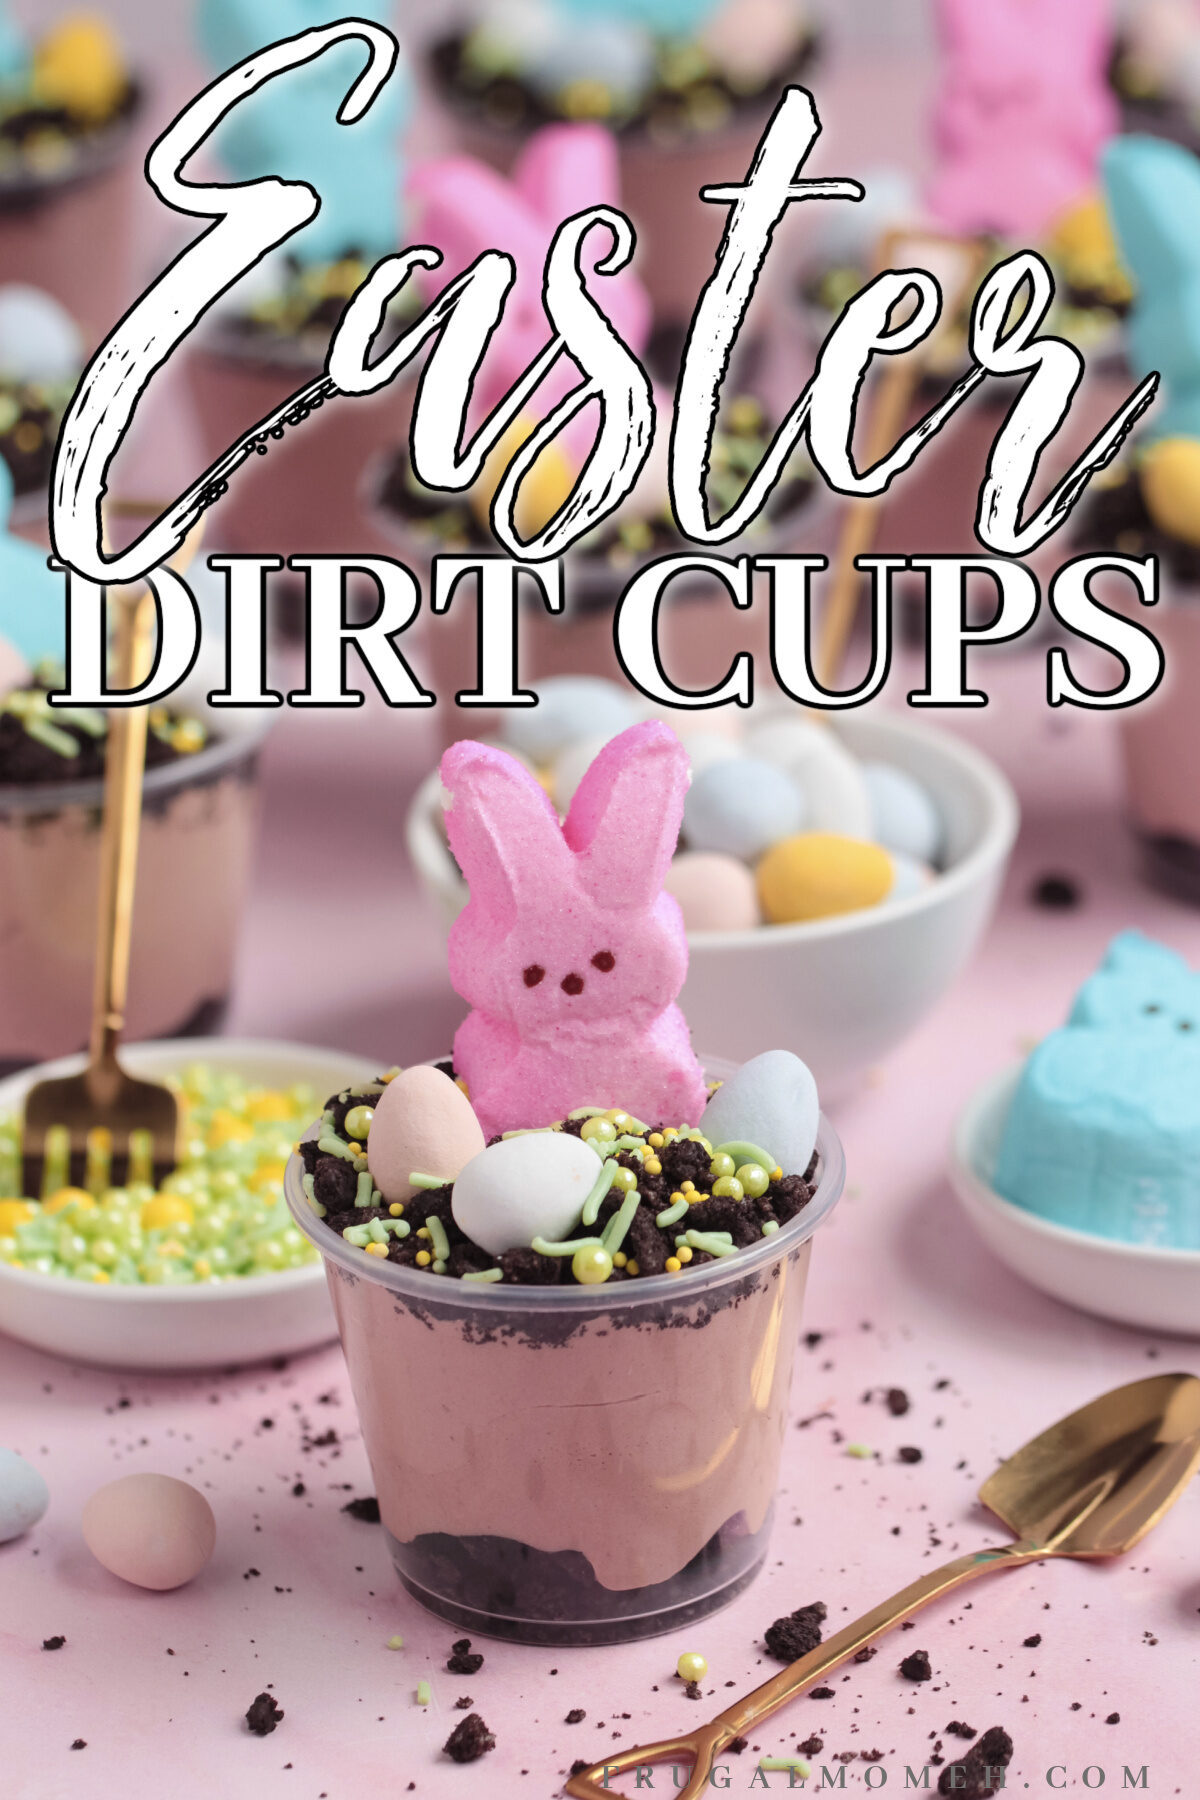 This fun and easy Easter Dirt Cups recipe features a velvety chocolate cheesecake filling, Oreo crumbs, and adorable peeps bunnies!